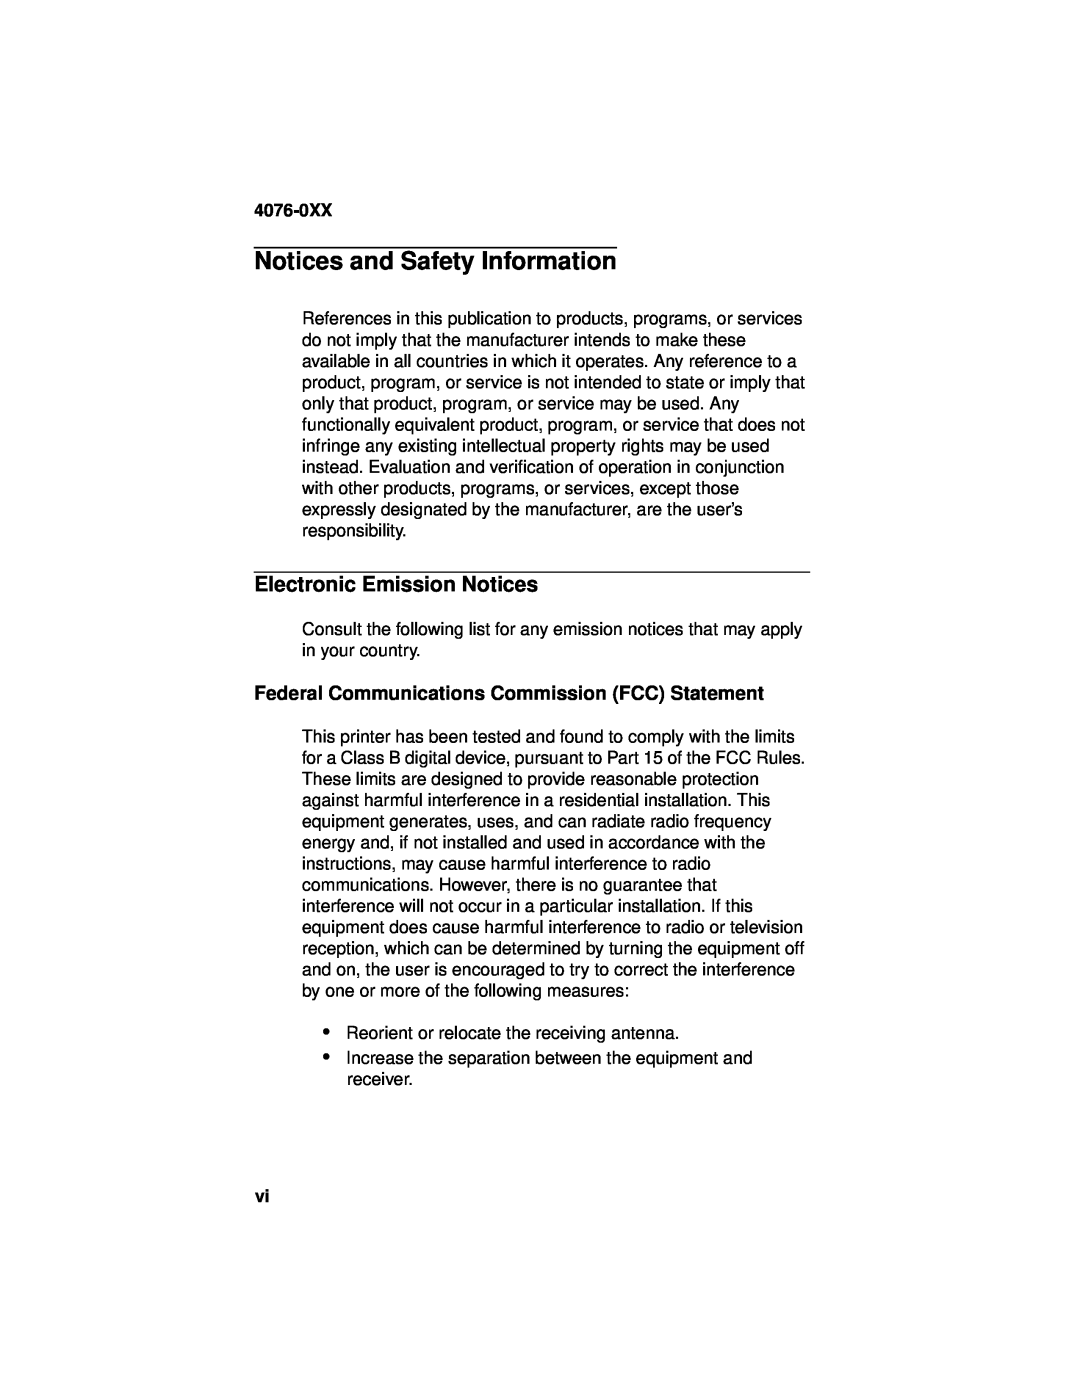 Lexmark 4076-0XX manual Notices and Safety Information, Electronic Emission Notices 